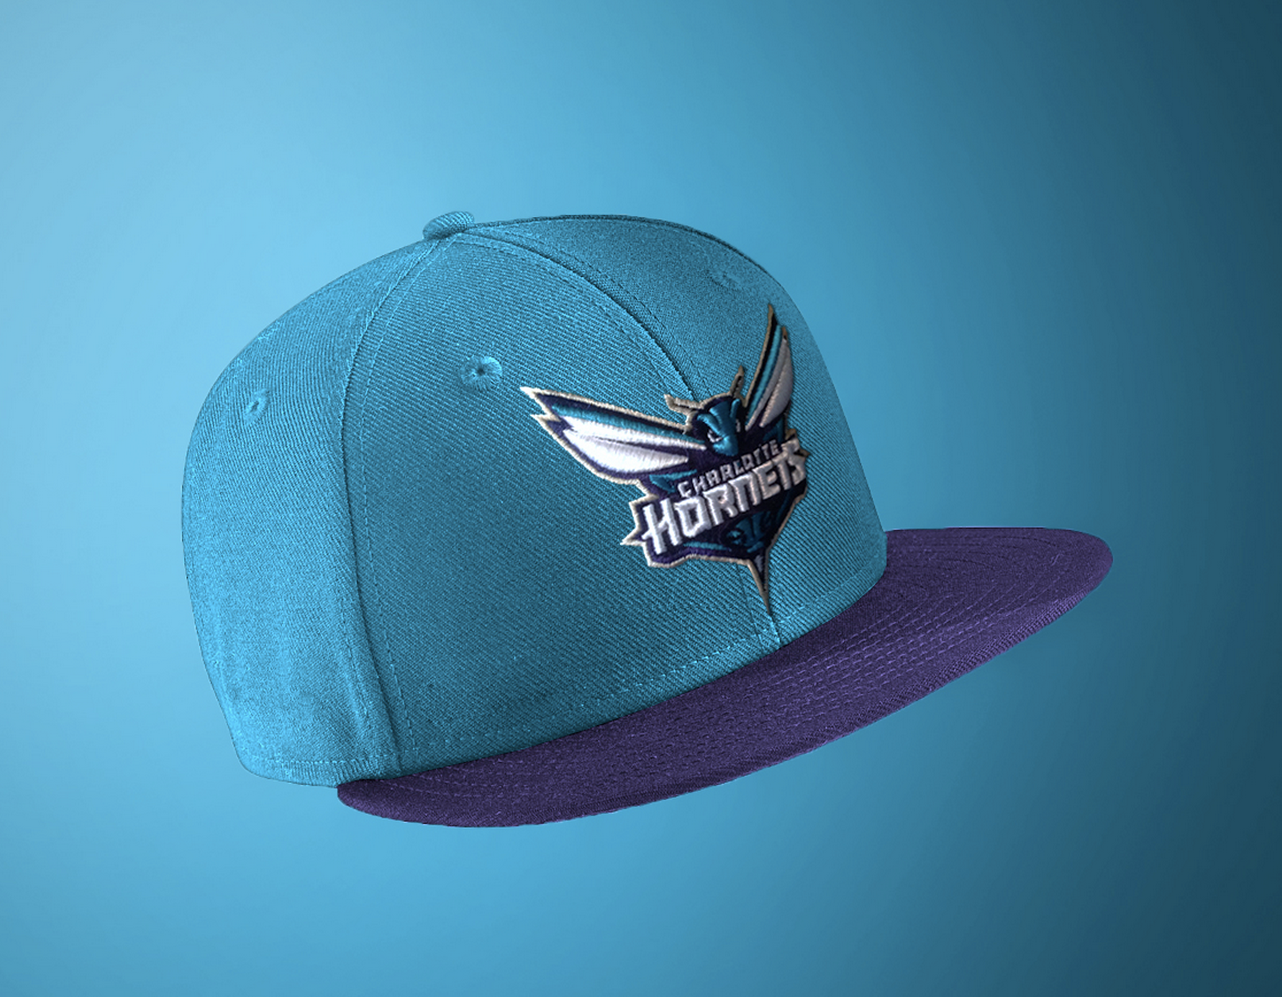 Charlotte Hornets Identity on a new cap